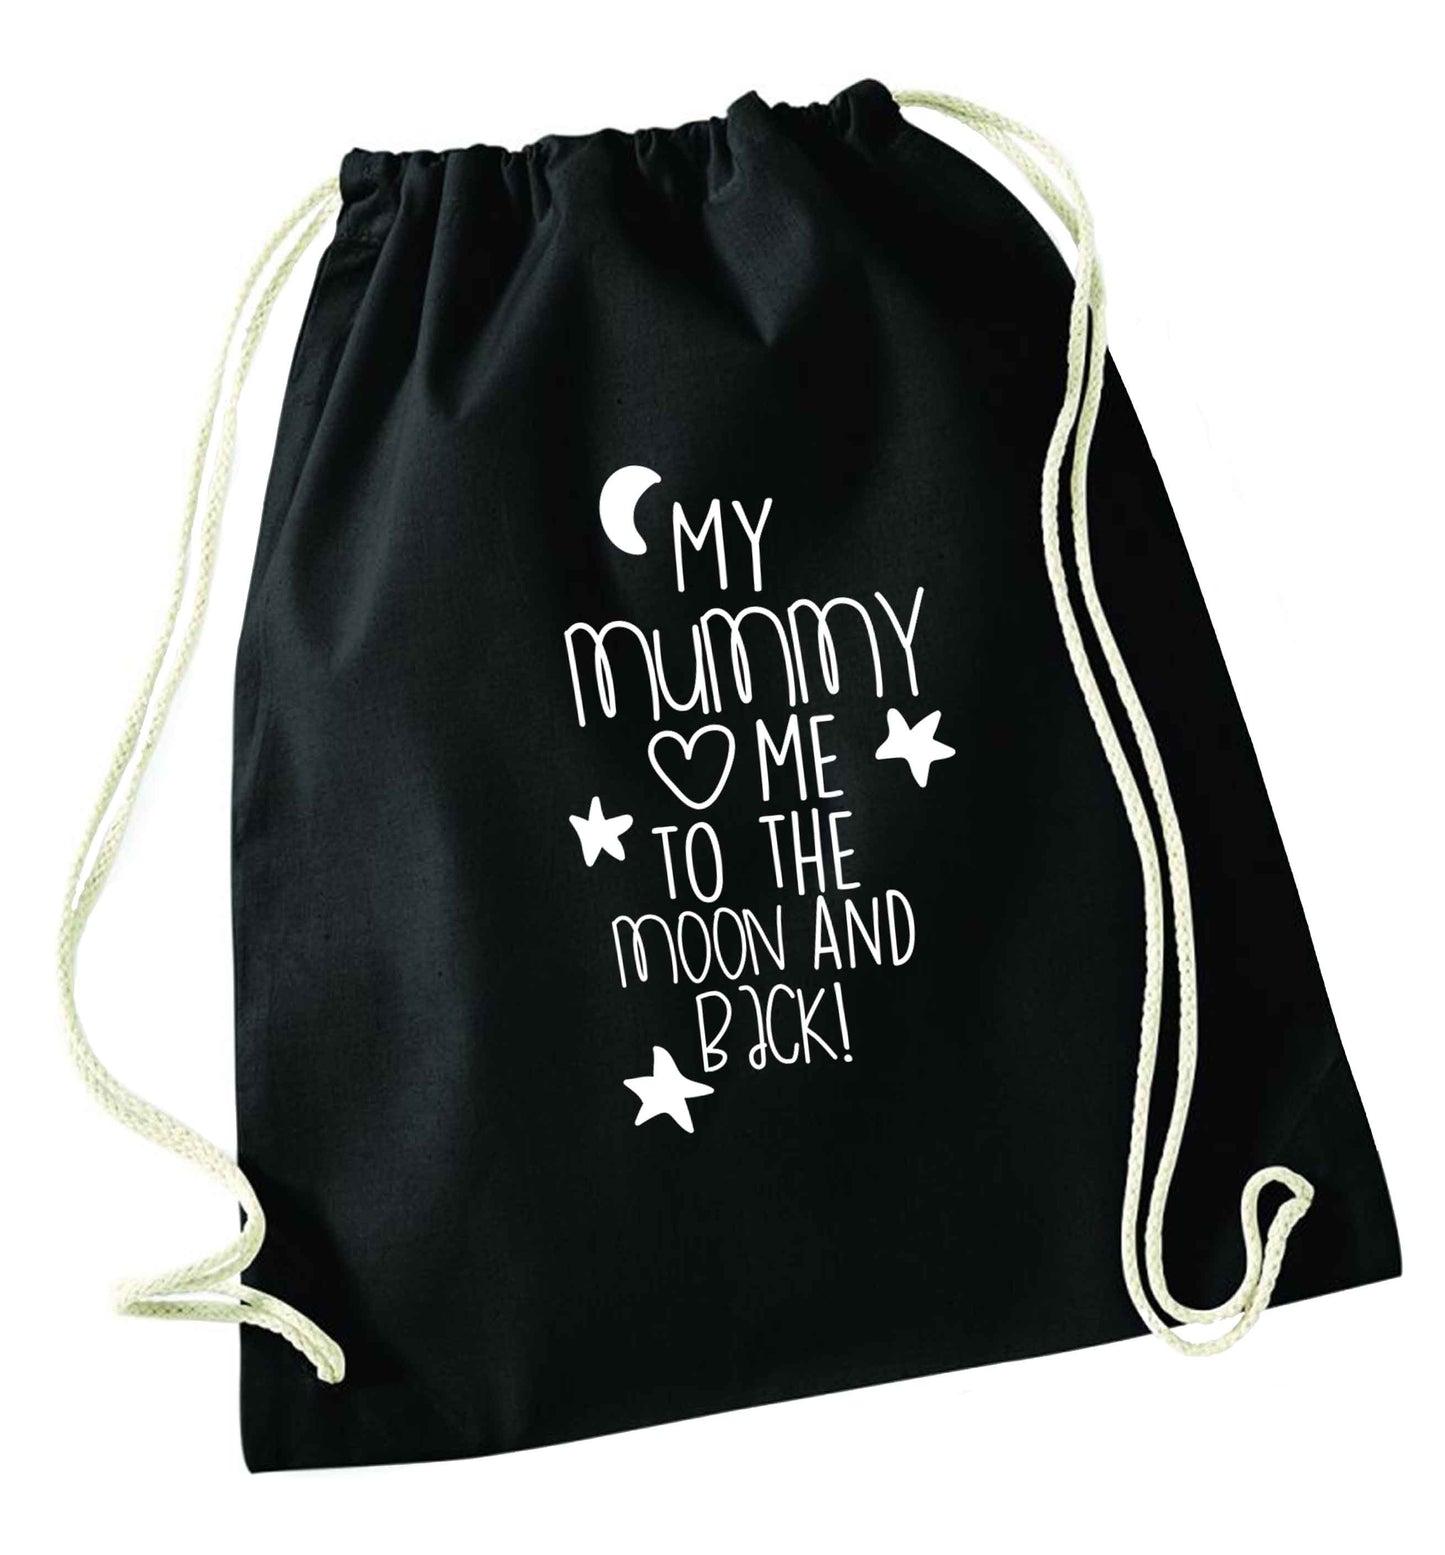 My mum loves me to the moon and back black drawstring bag